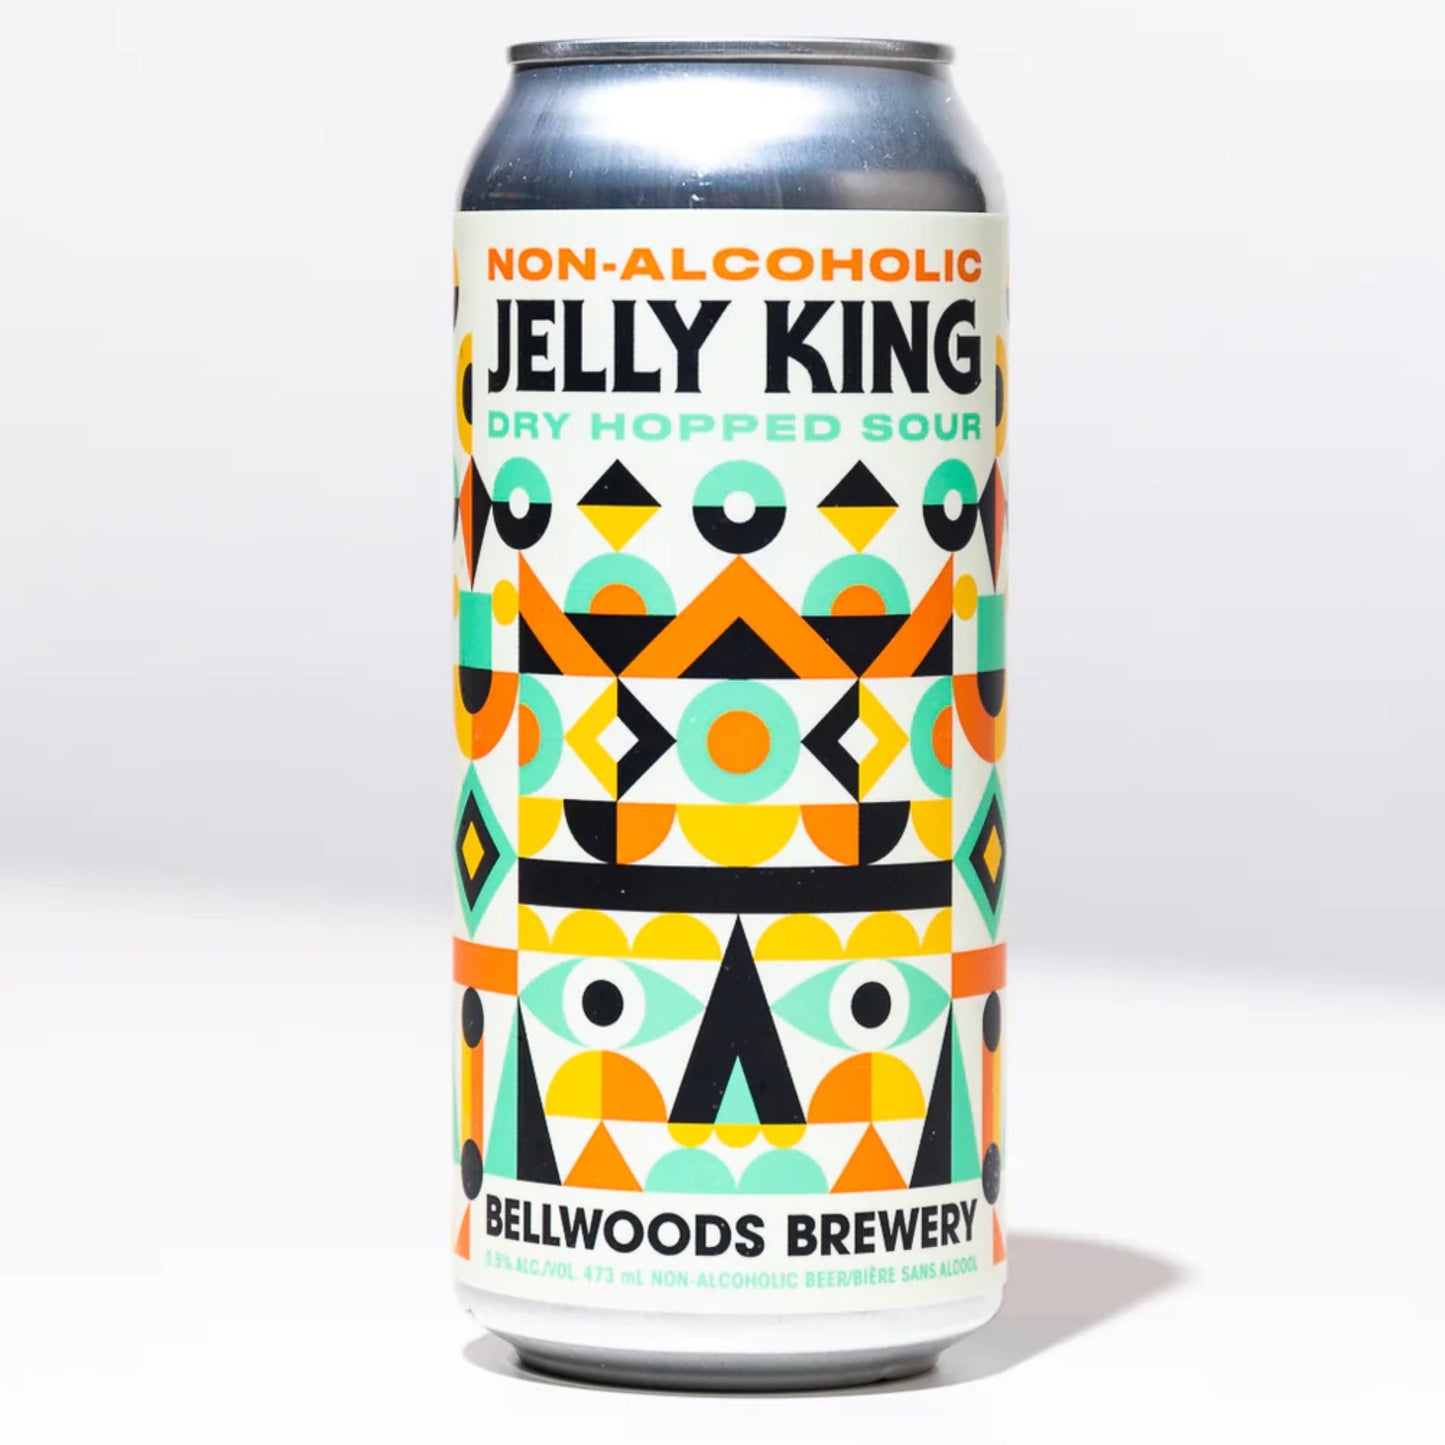 Bellwoods Brewery Jelly King Dry Hopped Sour (473mL x 1)